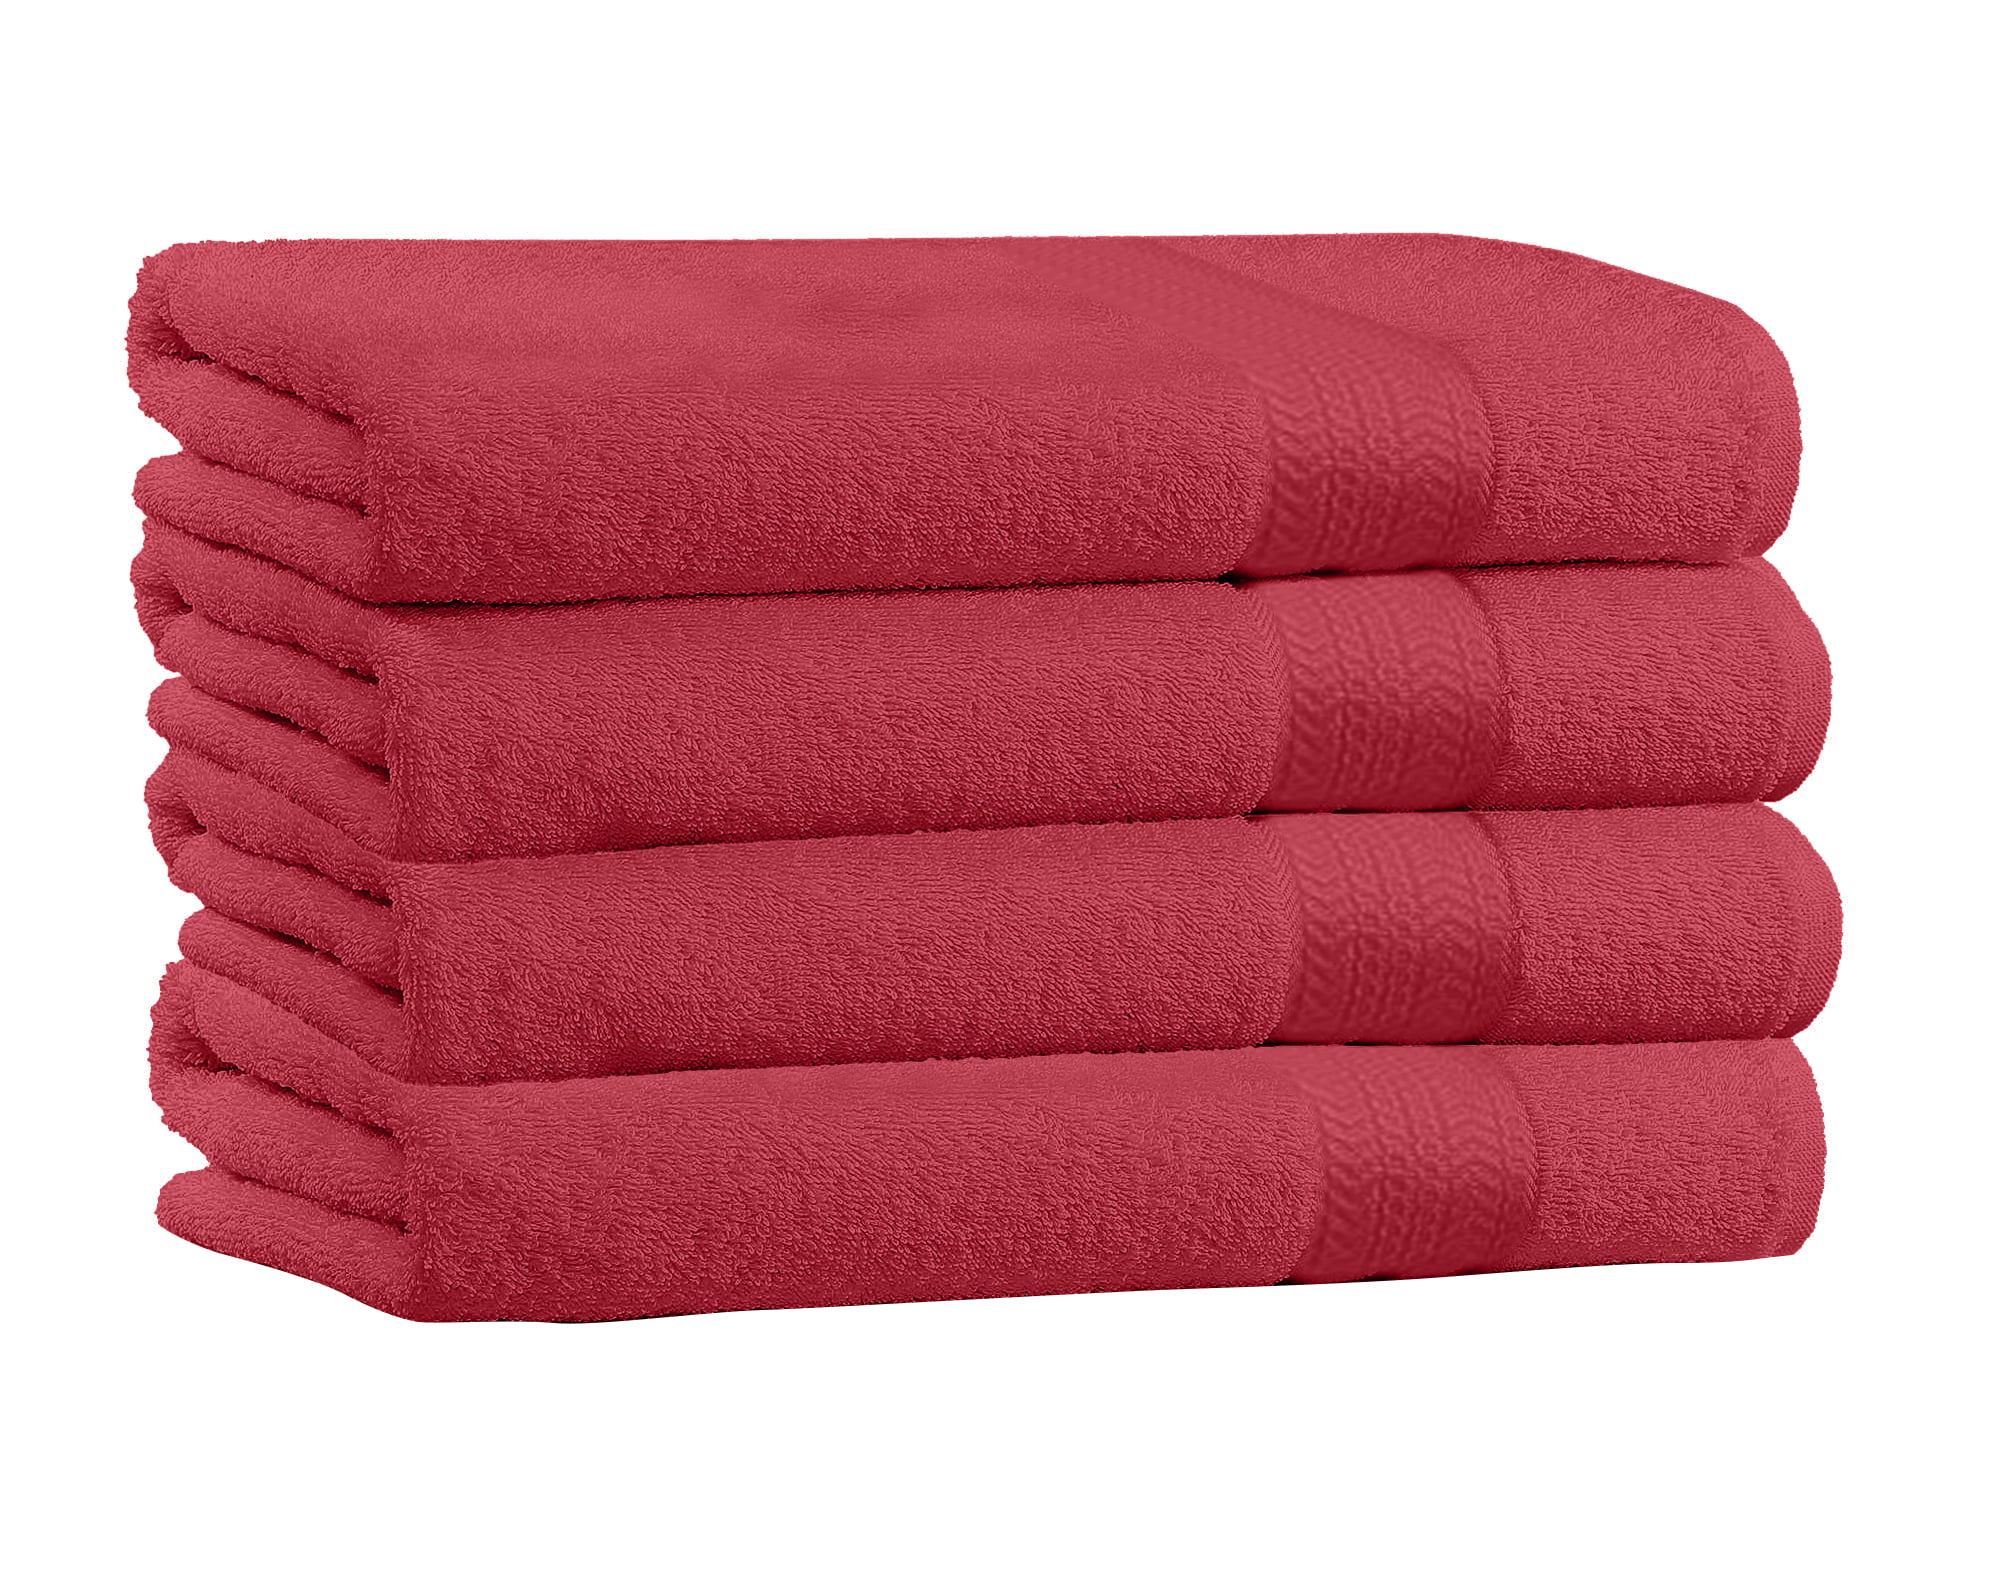 100% Cotton 4-Pack Bath Towel Sets - Extra Plush & Absorbent Cherry Red  Bath Towels - 54 x 27 (Cherry Red) 